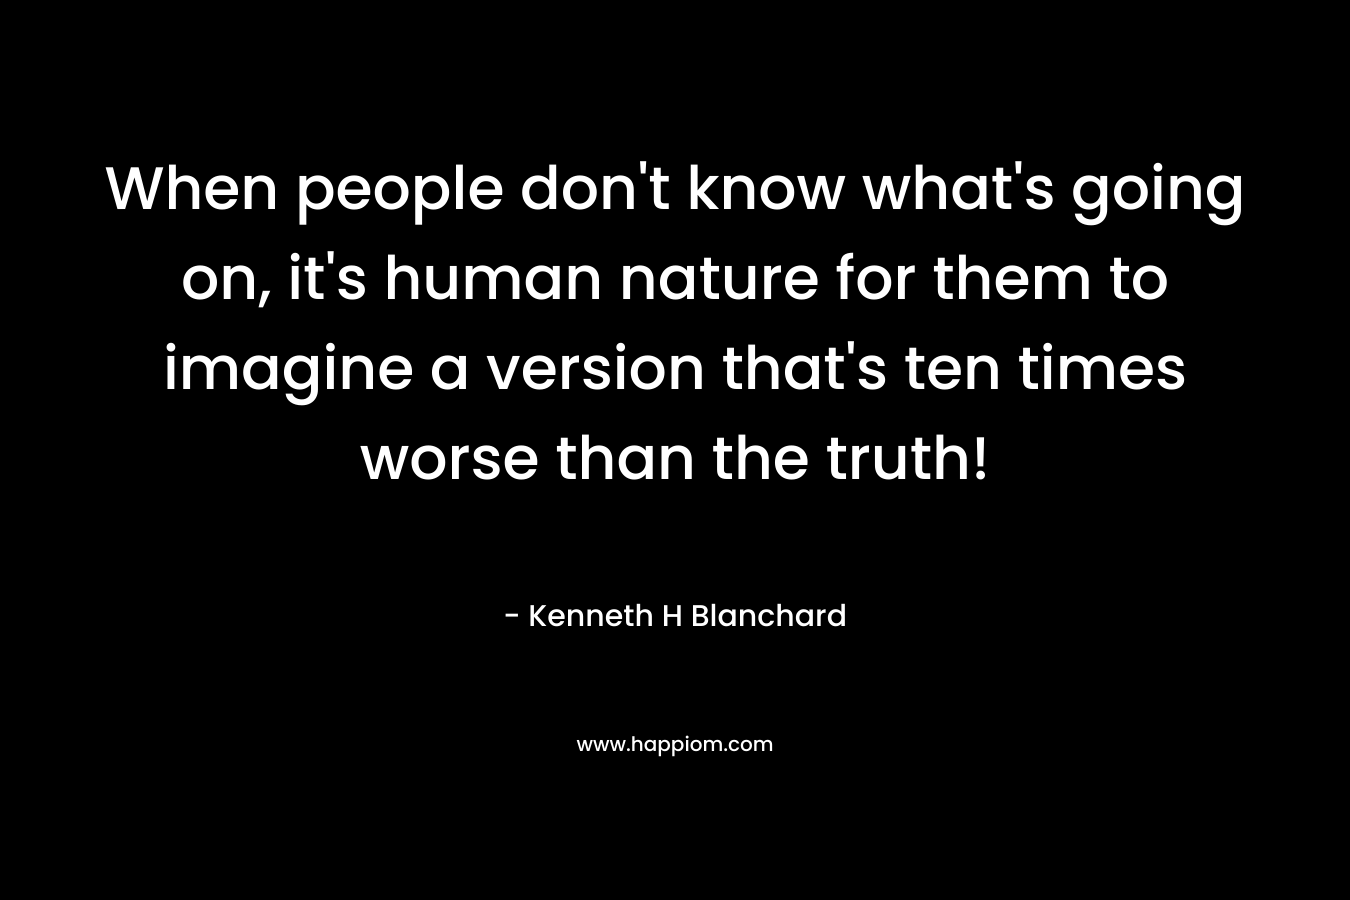 When people don't know what's going on, it's human nature for them to imagine a version that's ten times worse than the truth!